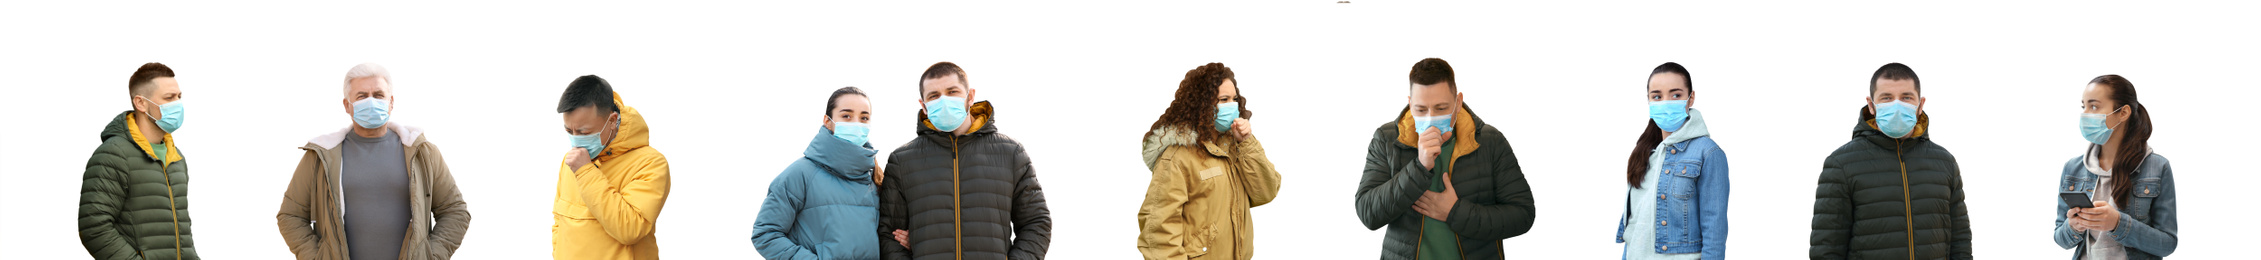 Image of Collage of people wearing medical face masks on white background. Banner design